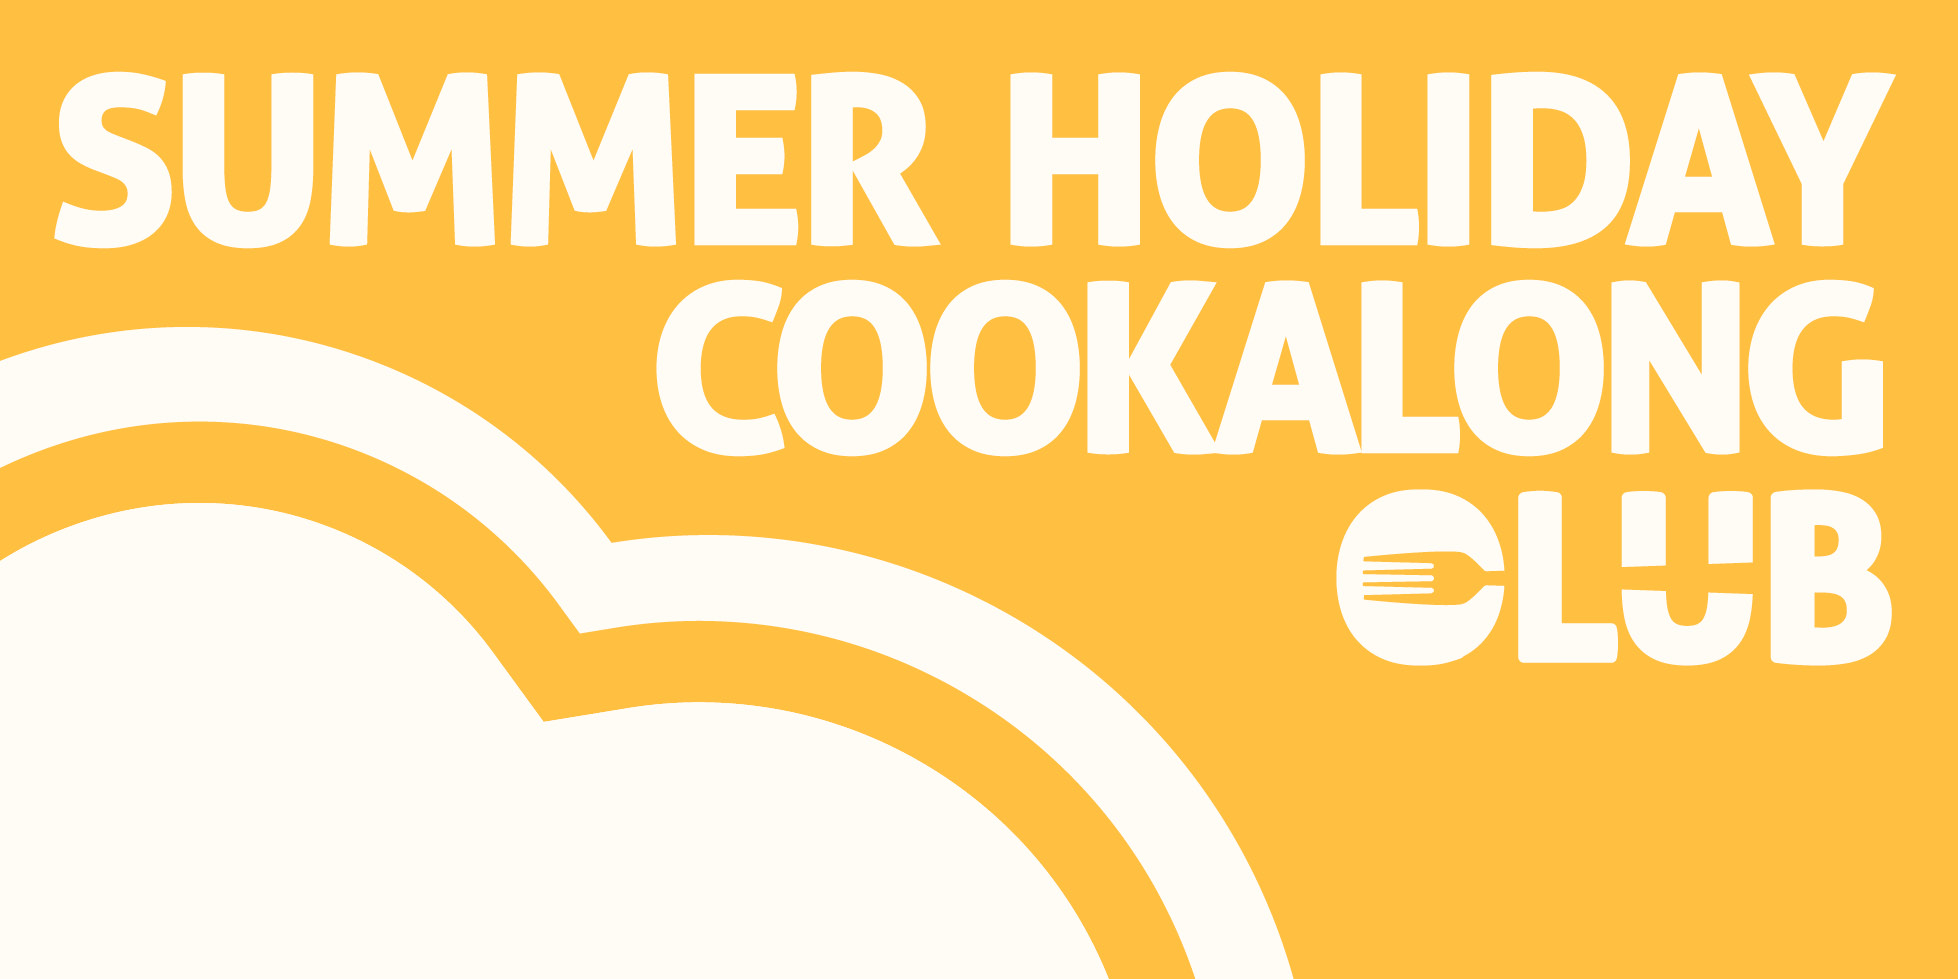 Yellow heart with text "Summer Holiday Cookalong Club"